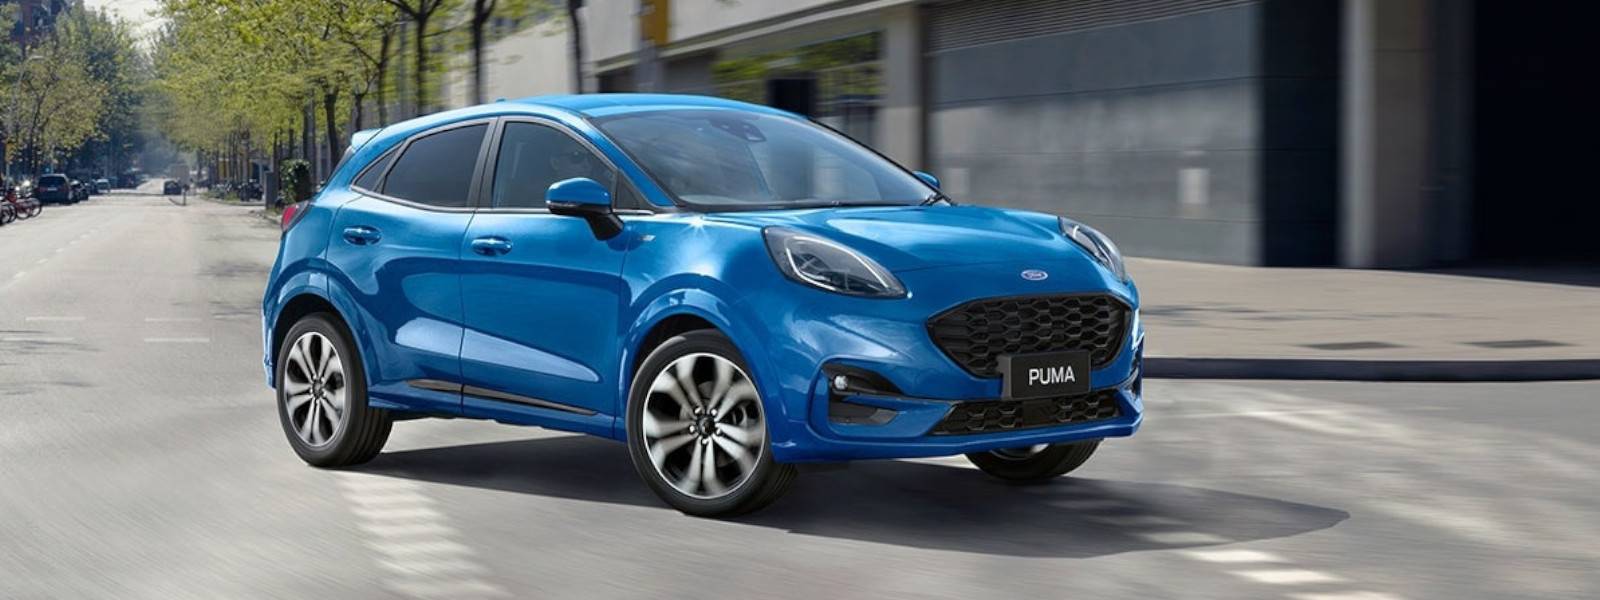 Get Curious with the All-New Ford Puma!